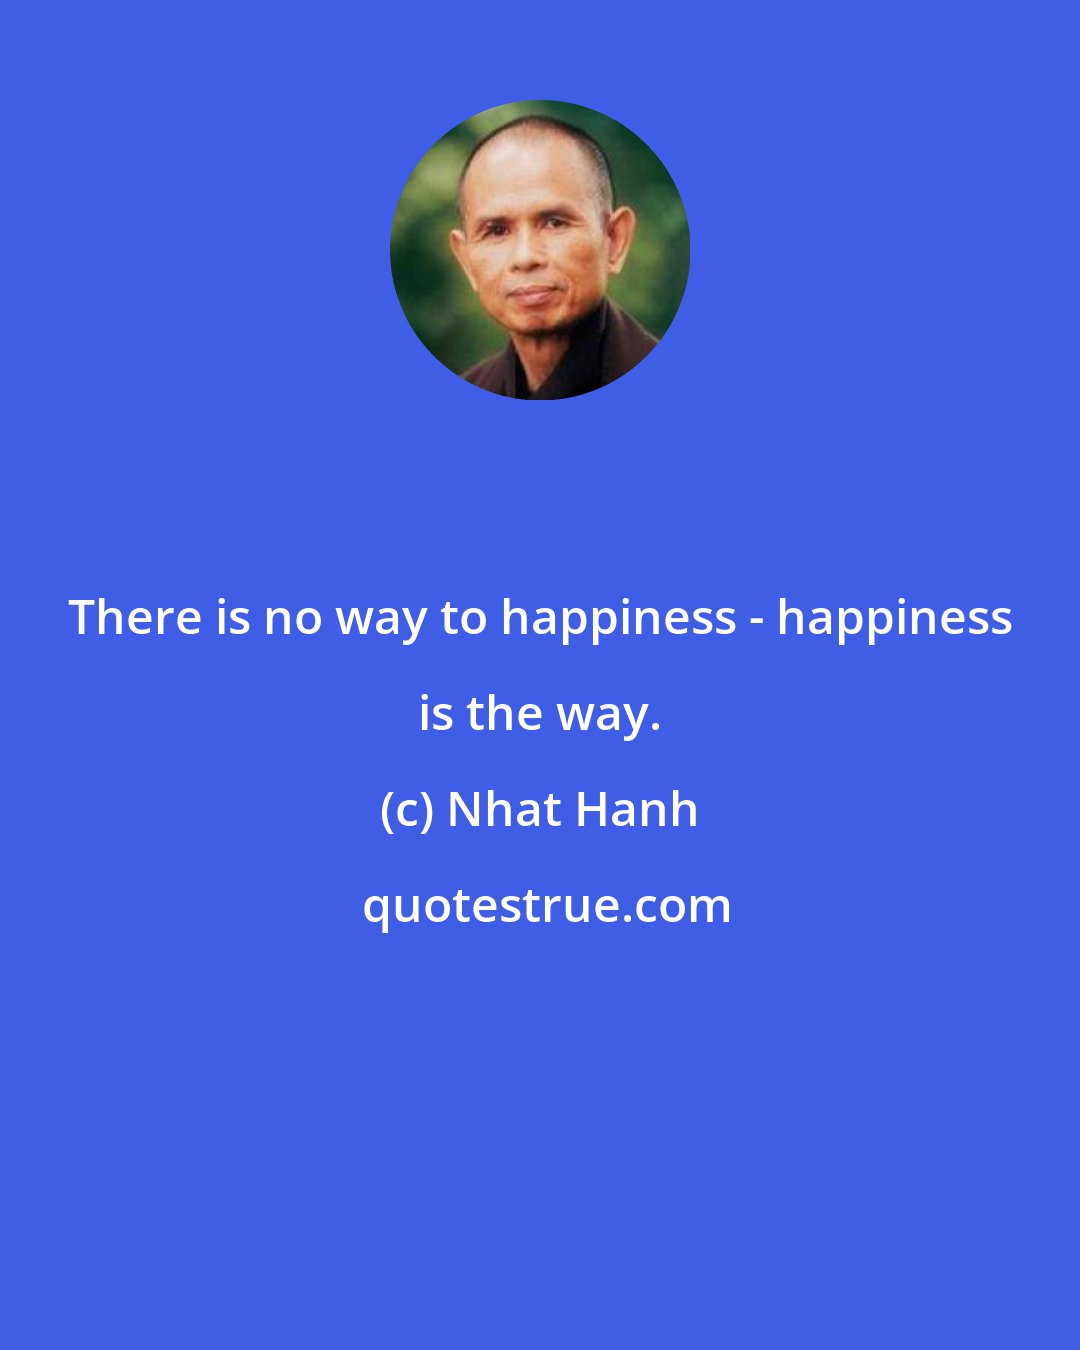 Nhat Hanh: There is no way to happiness - happiness is the way.